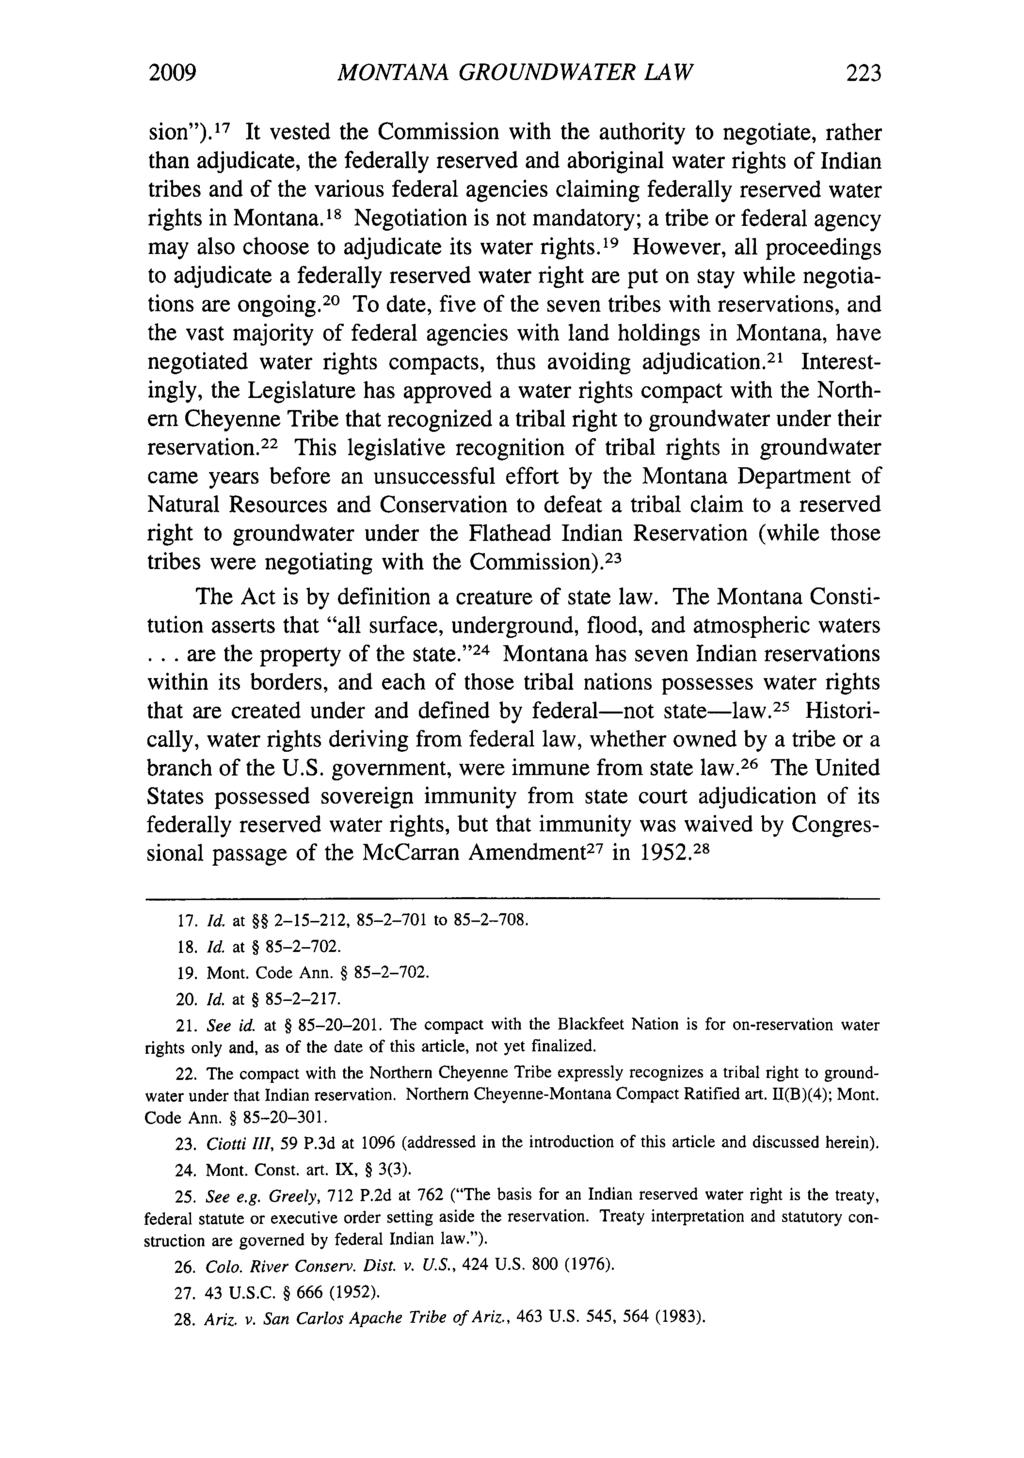 2009 Carter: Montana Groundwater Law MONTANA GROUNDWATER LAW sion").